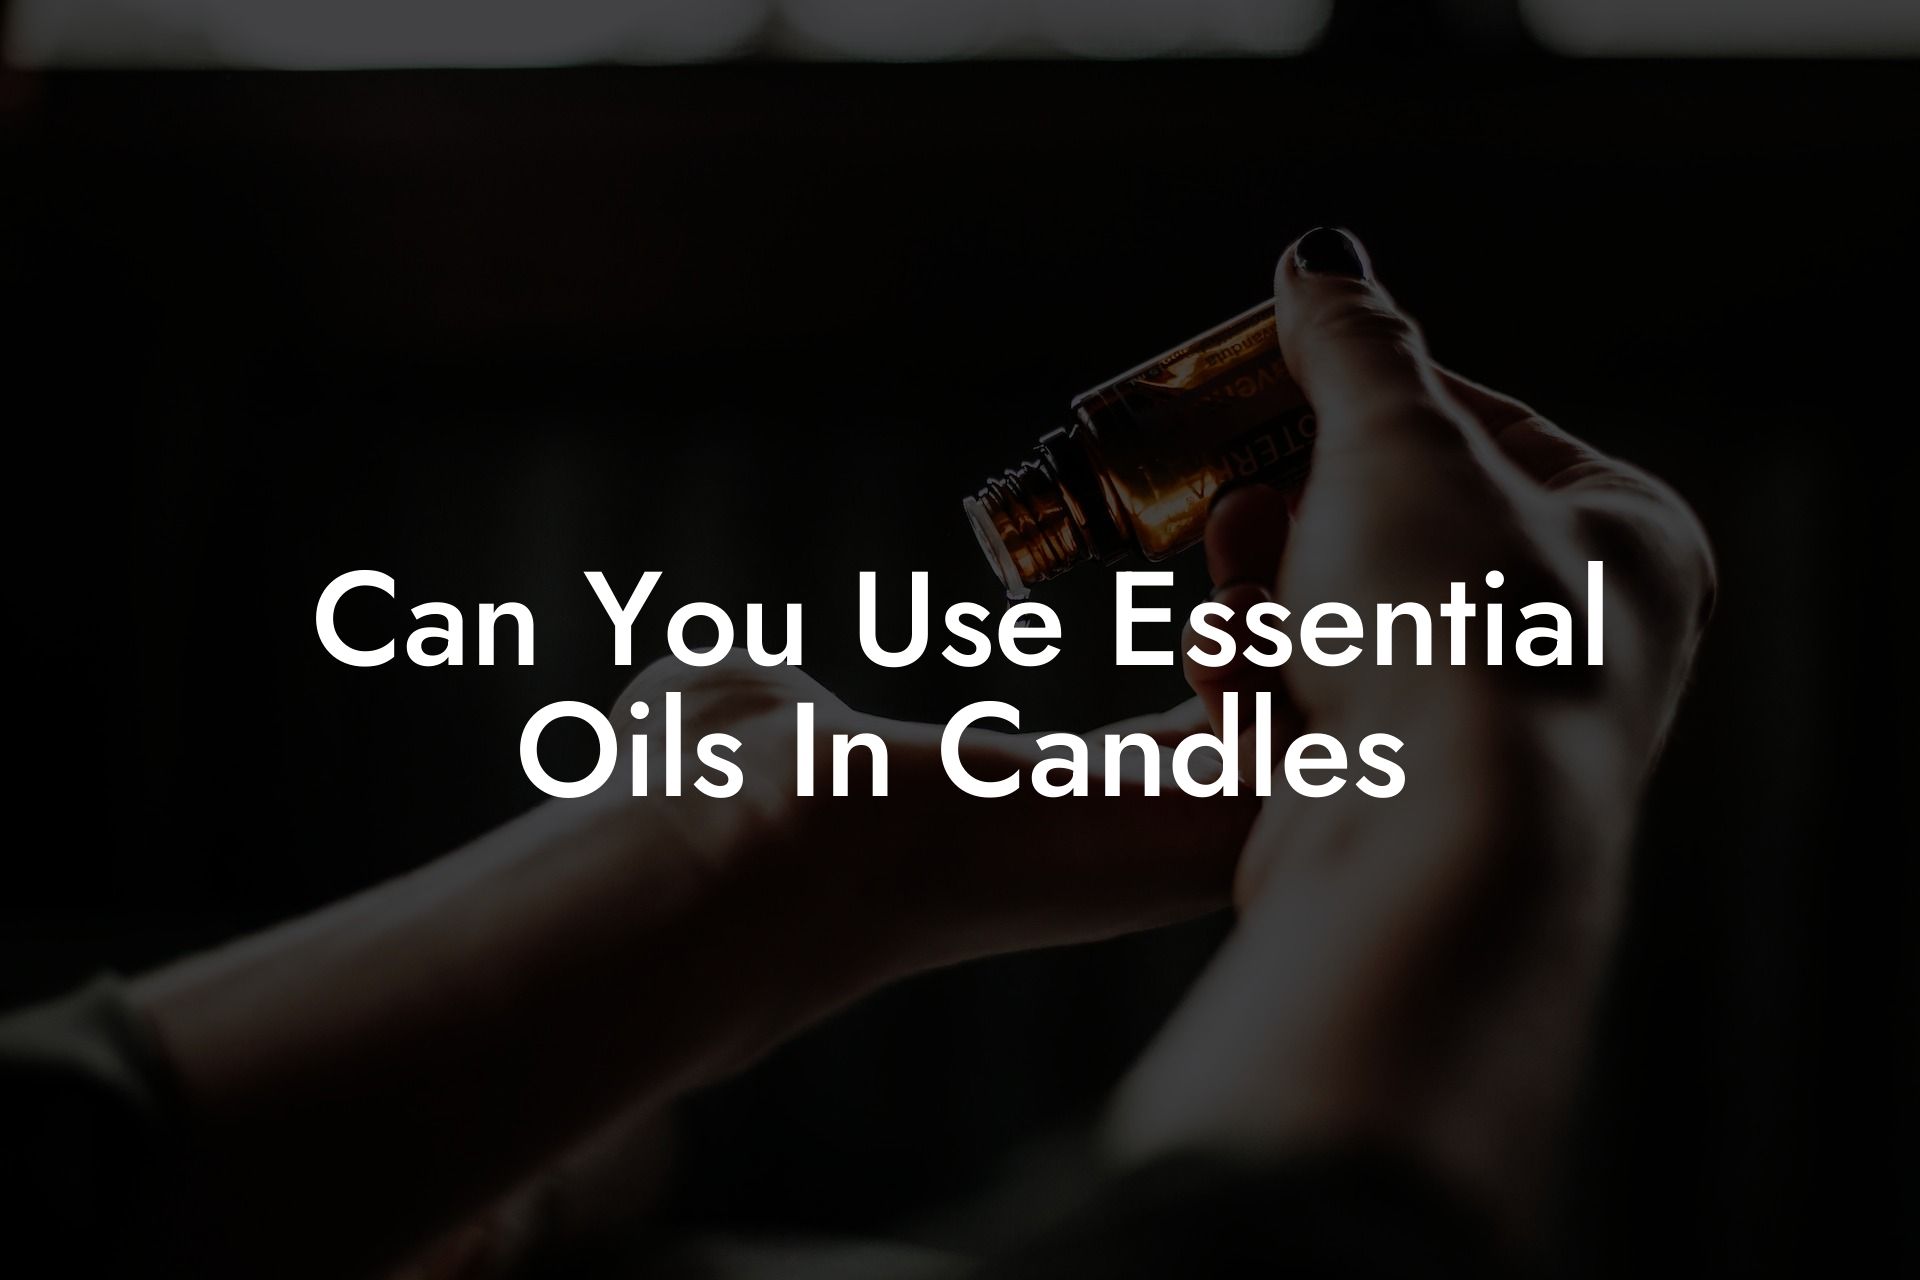 Can You Use Essential Oils In Candles